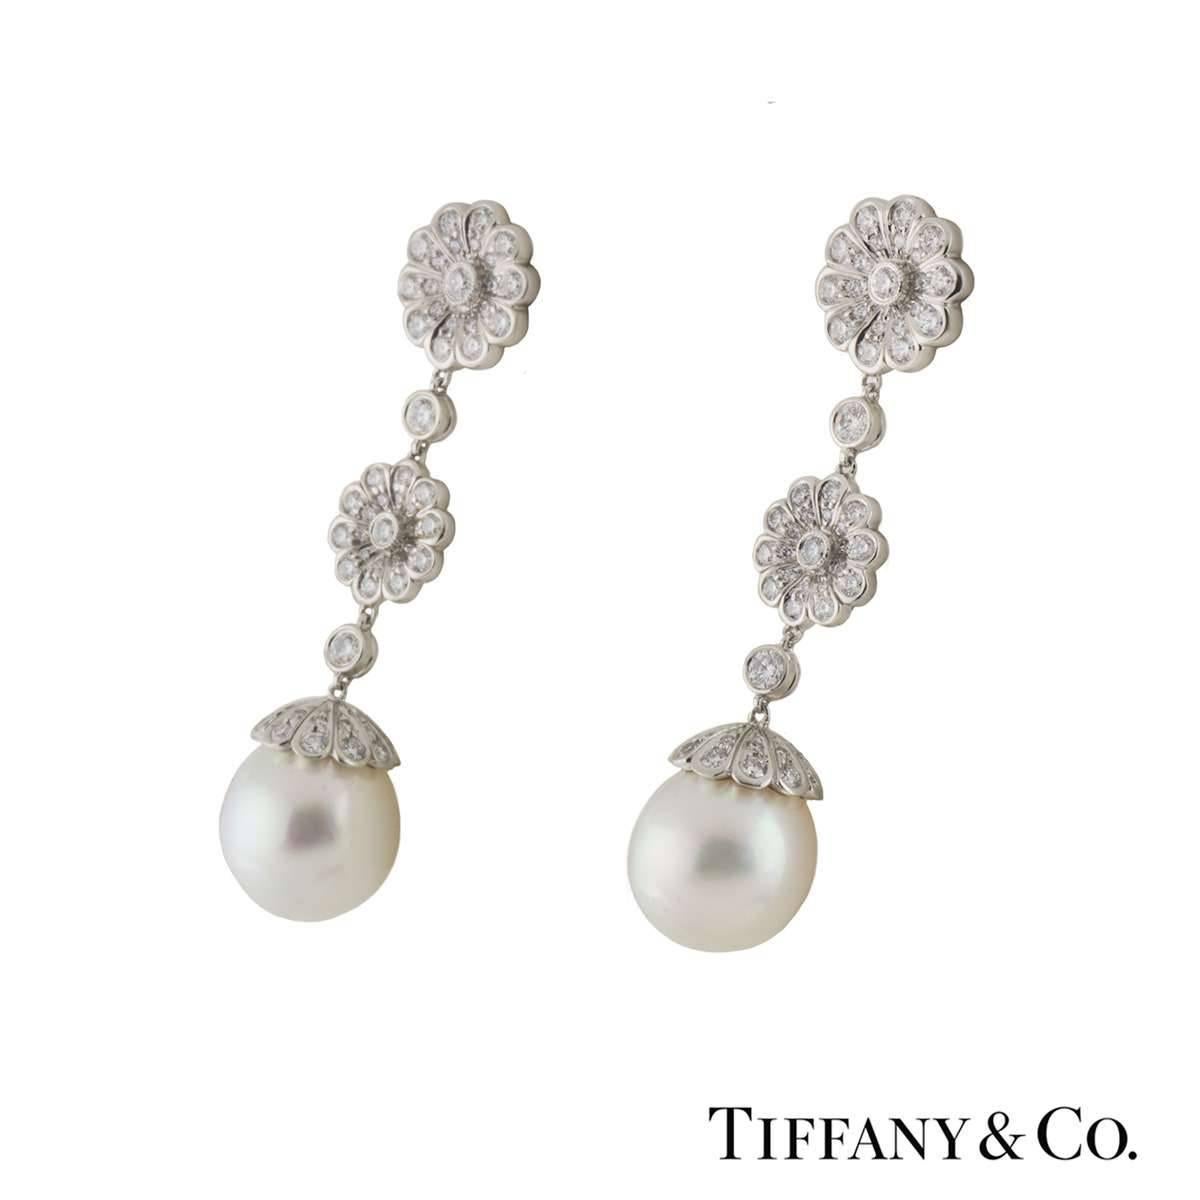 A beautiful pair of platinum diamond and pearl Tiffany & Co. drop earrings. The earrings comprise of flower motifs dangling freely with round brilliant cut diamonds in a pave setting. Complementing the motifs are pearls 10mm in diameter. The